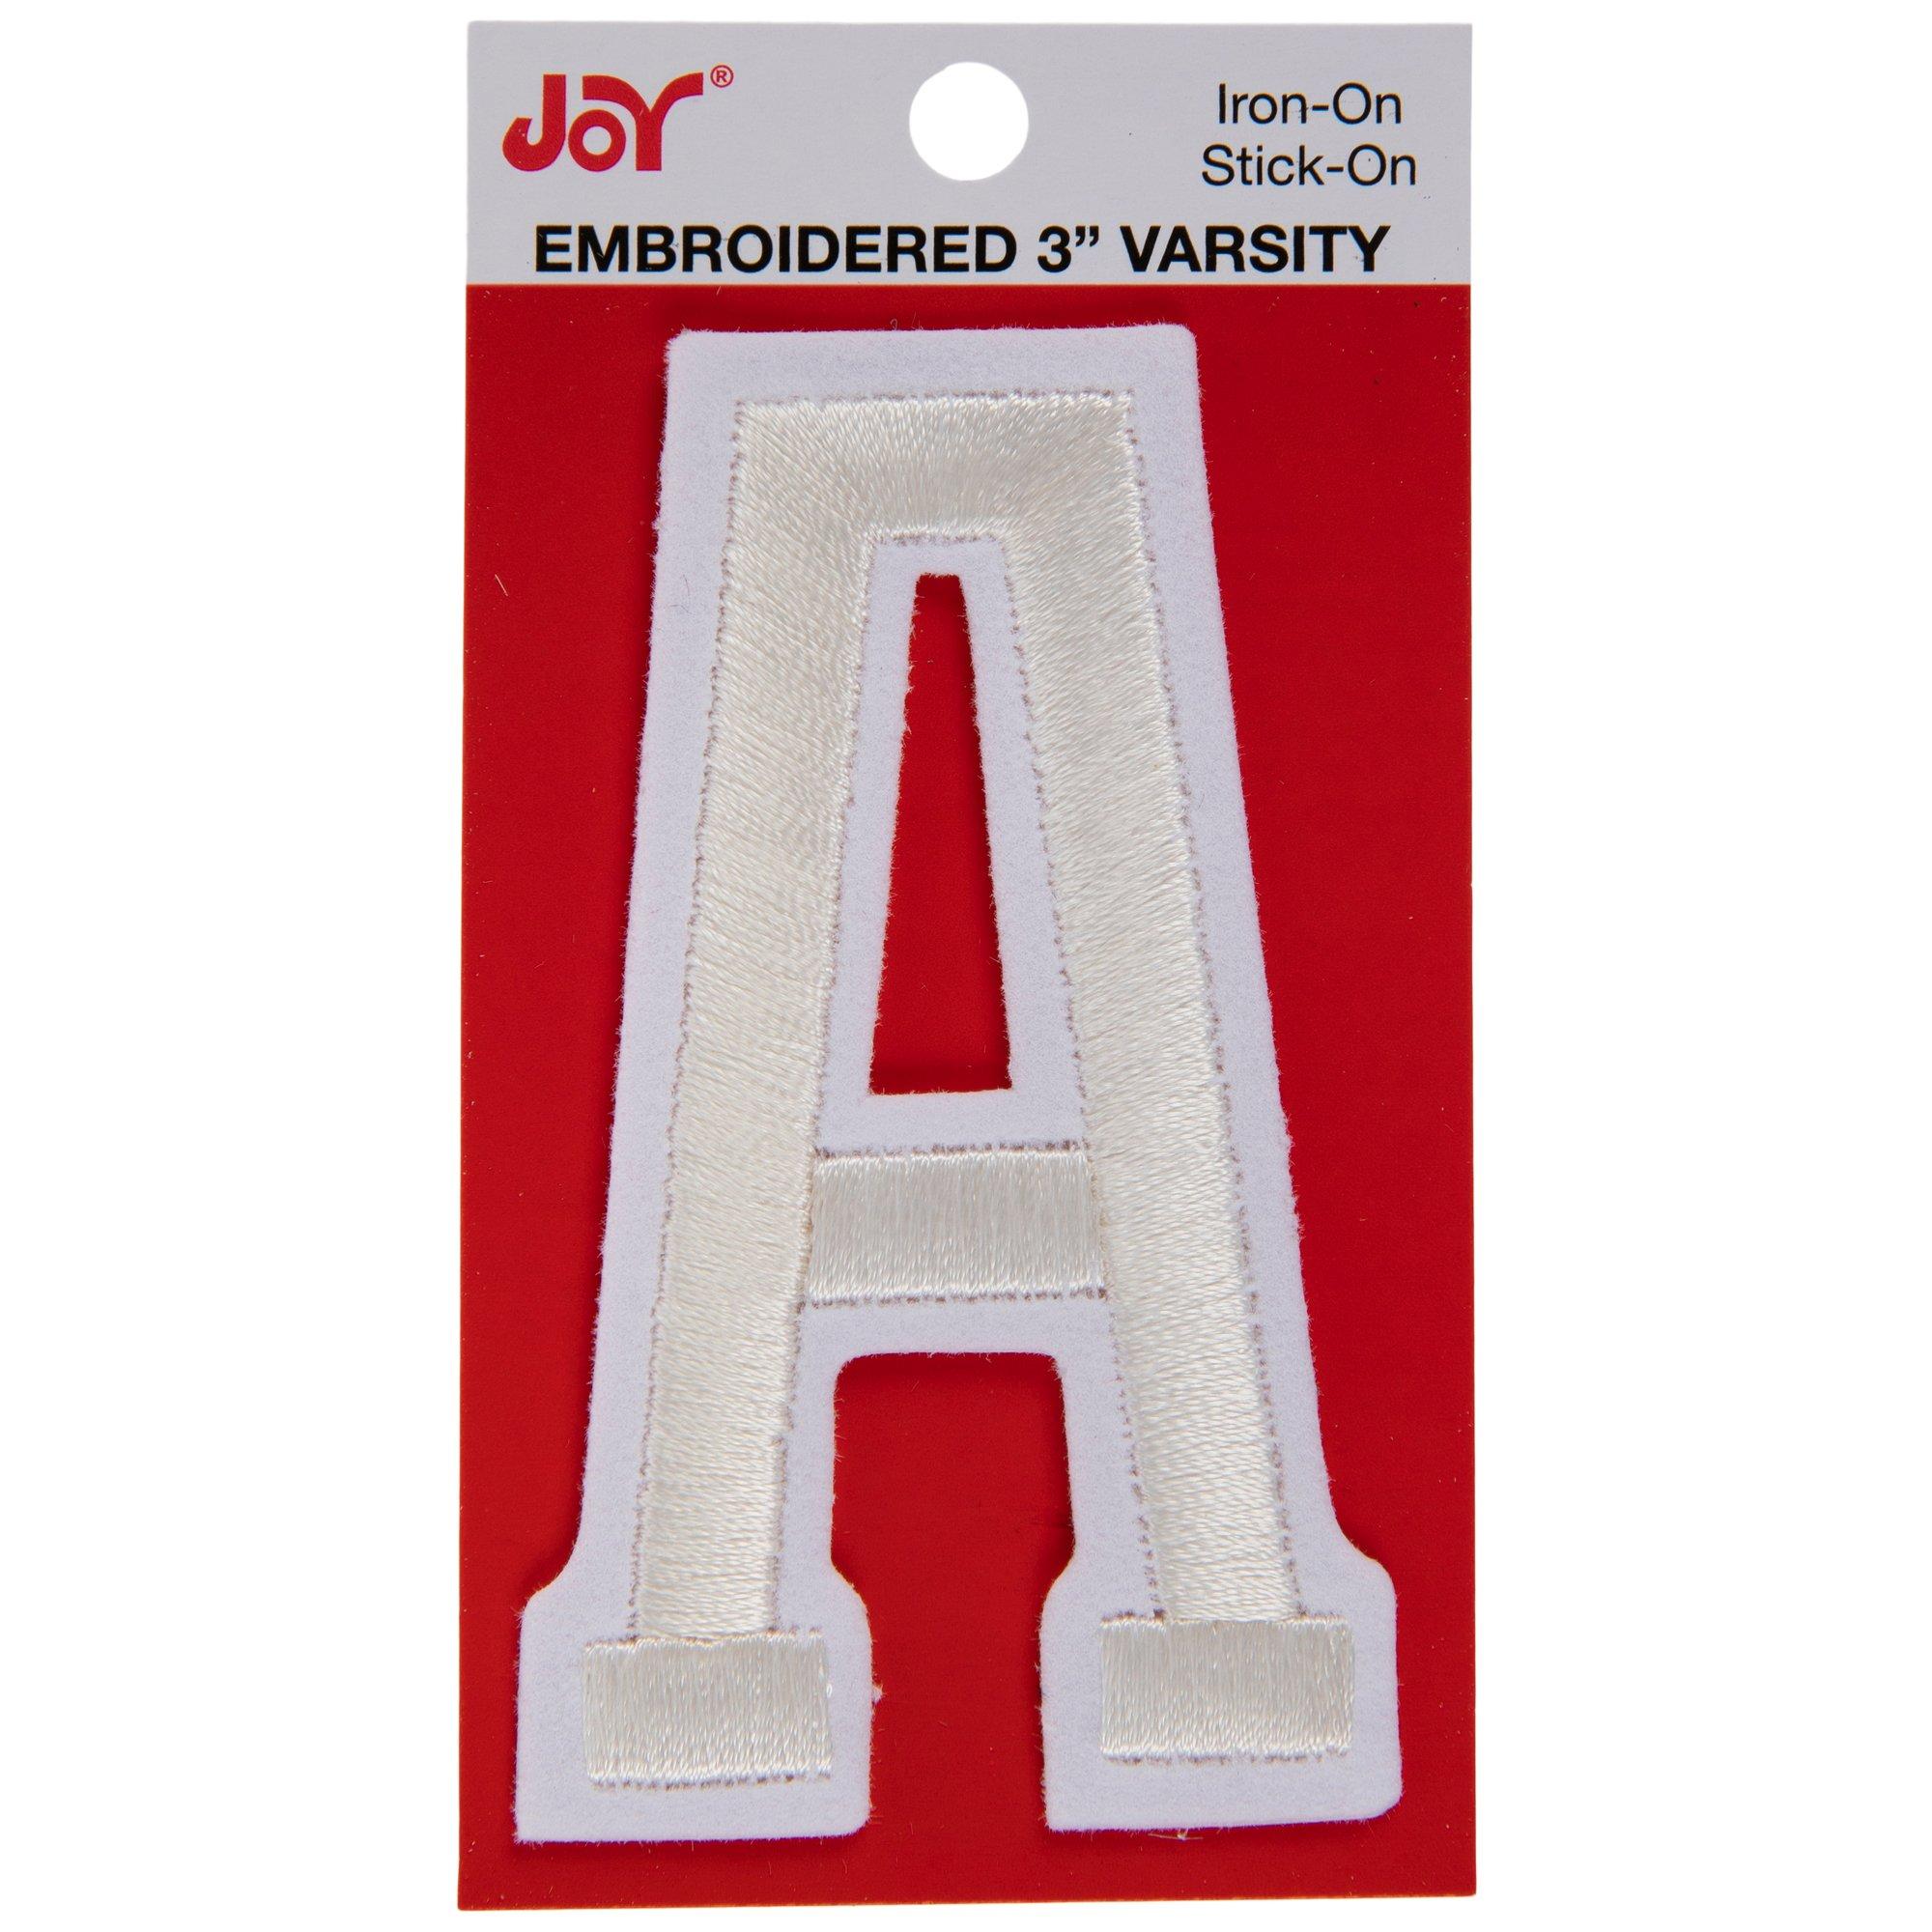 3 Embroidered Iron-On Letter Patches, Alphabet Appliques, Letter Patches  for Clothing, DIY Craft - Red/White